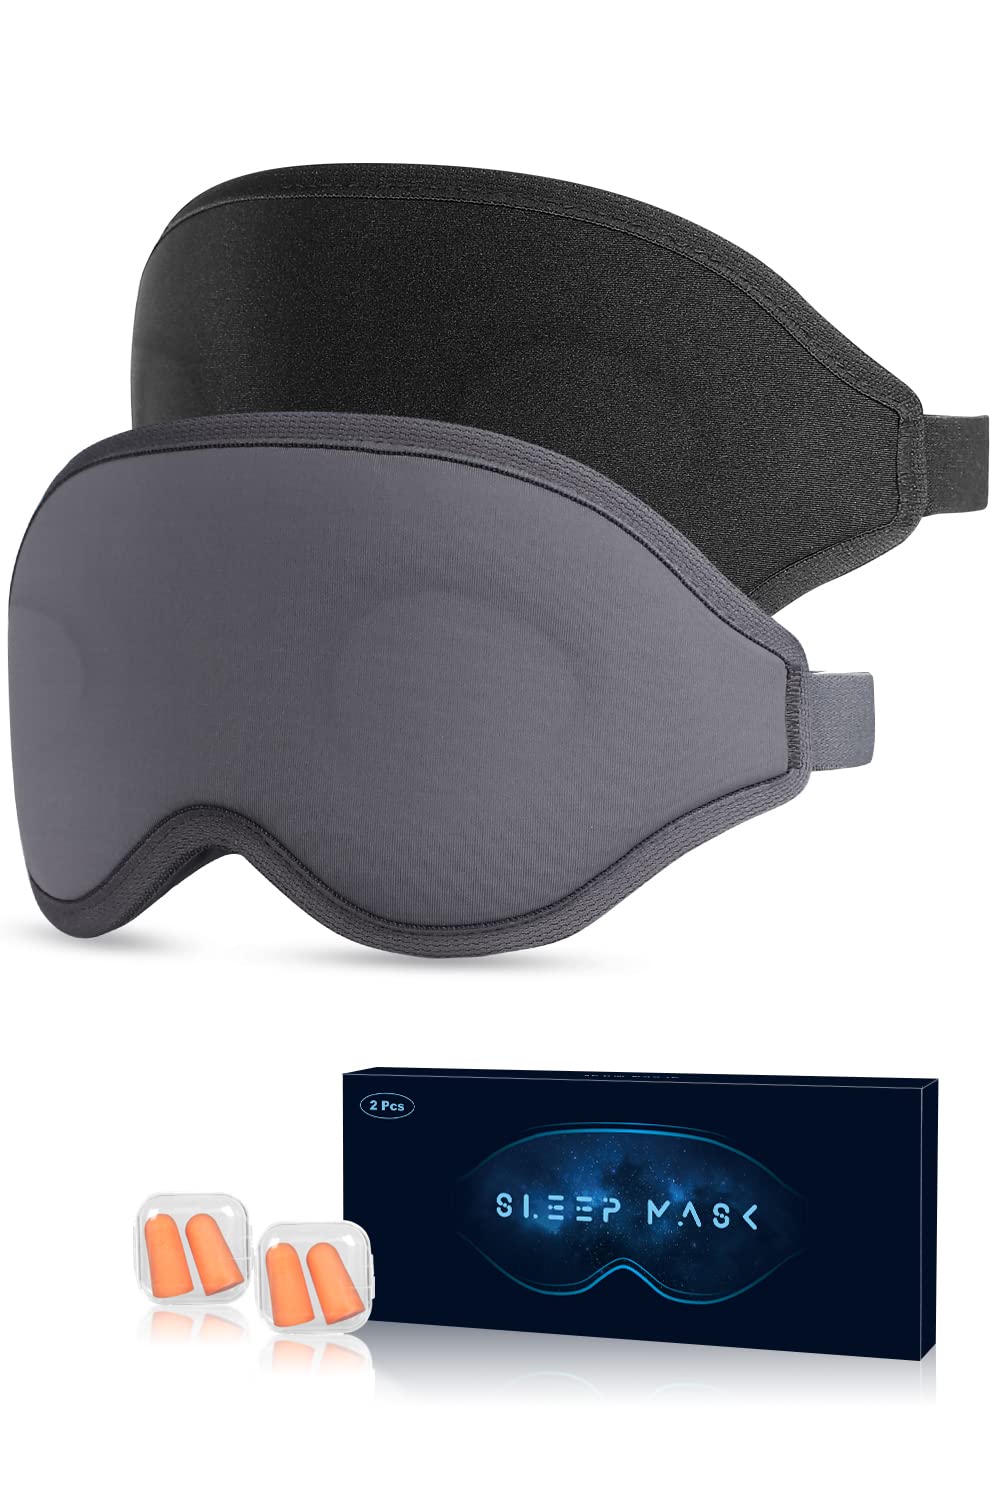 [Australia] - Sleep Mask, 2-Pack of Super Soft and Comfortable 3D Drowsy Sleep Mask, 100% Blackout Sleep Aid Eye Mask for Side Sleepers with Adjustable Straps, Suitable for Travel, Lunch Breaks, Meditation 